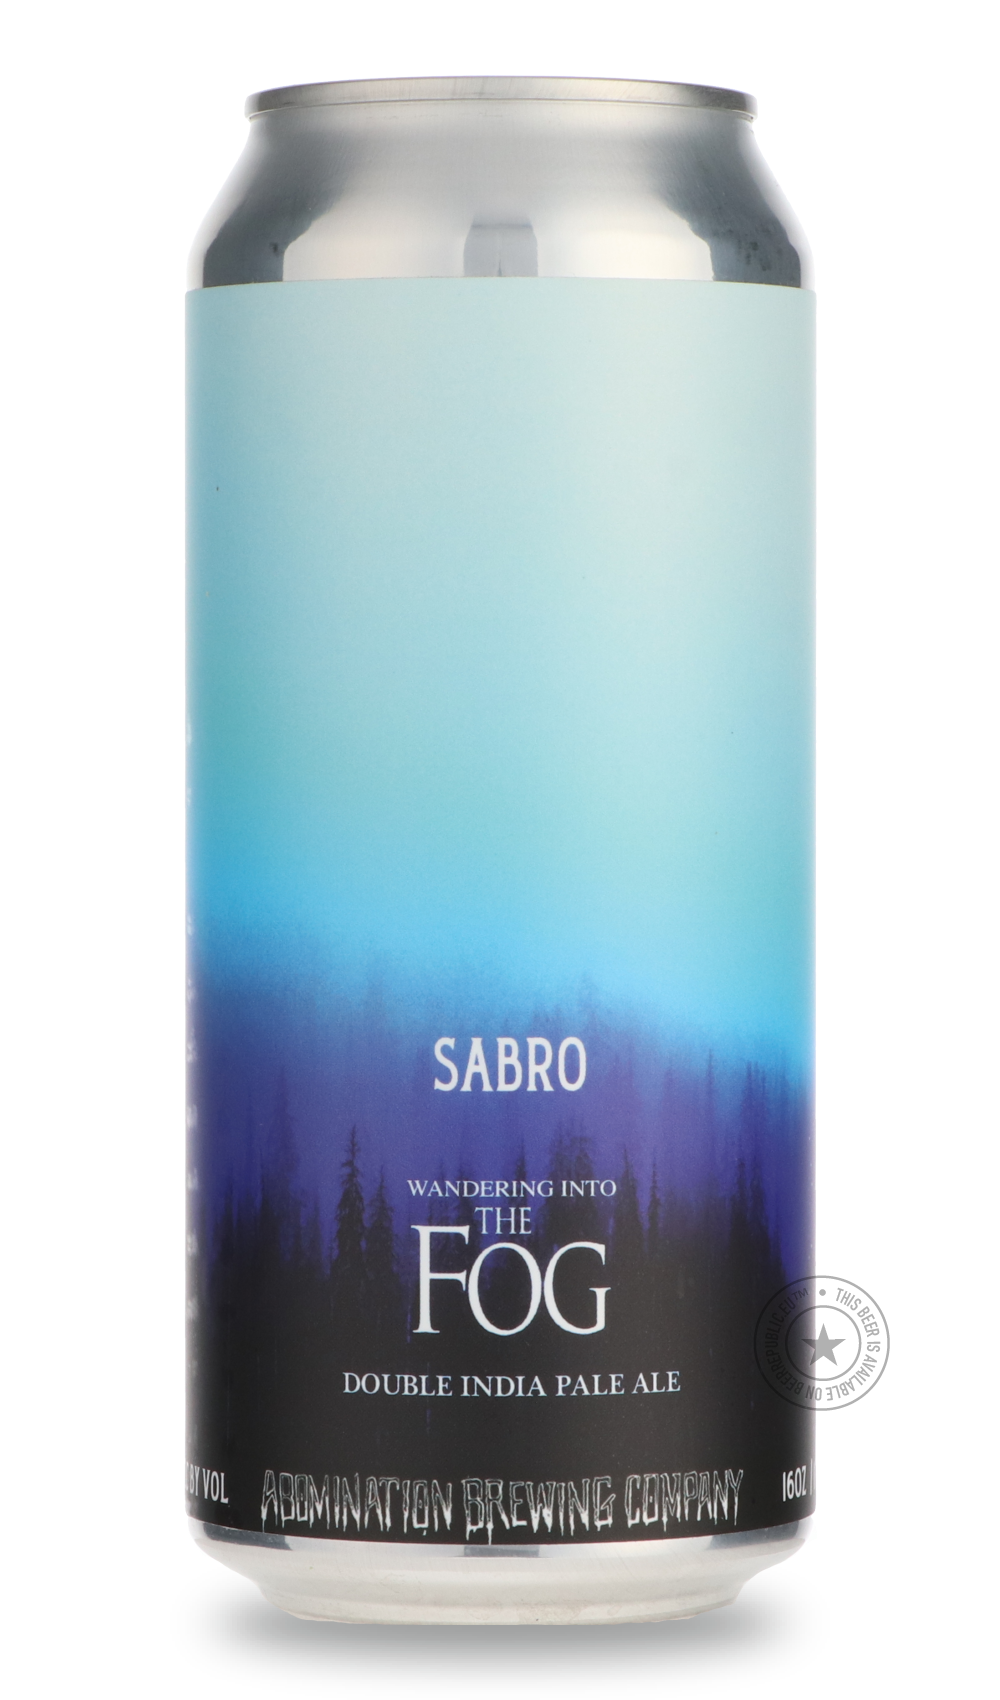 -Abomination- Wandering Into the Fog (Sabro)-IPA- Only @ Beer Republic - The best online beer store for American & Canadian craft beer - Buy beer online from the USA and Canada - Bier online kopen - Amerikaans bier kopen - Craft beer store - Craft beer kopen - Amerikanisch bier kaufen - Bier online kaufen - Acheter biere online - IPA - Stout - Porter - New England IPA - Hazy IPA - Imperial Stout - Barrel Aged - Barrel Aged Imperial Stout - Brown - Dark beer - Blond - Blonde - Pilsner - Lager - Wheat - Weize